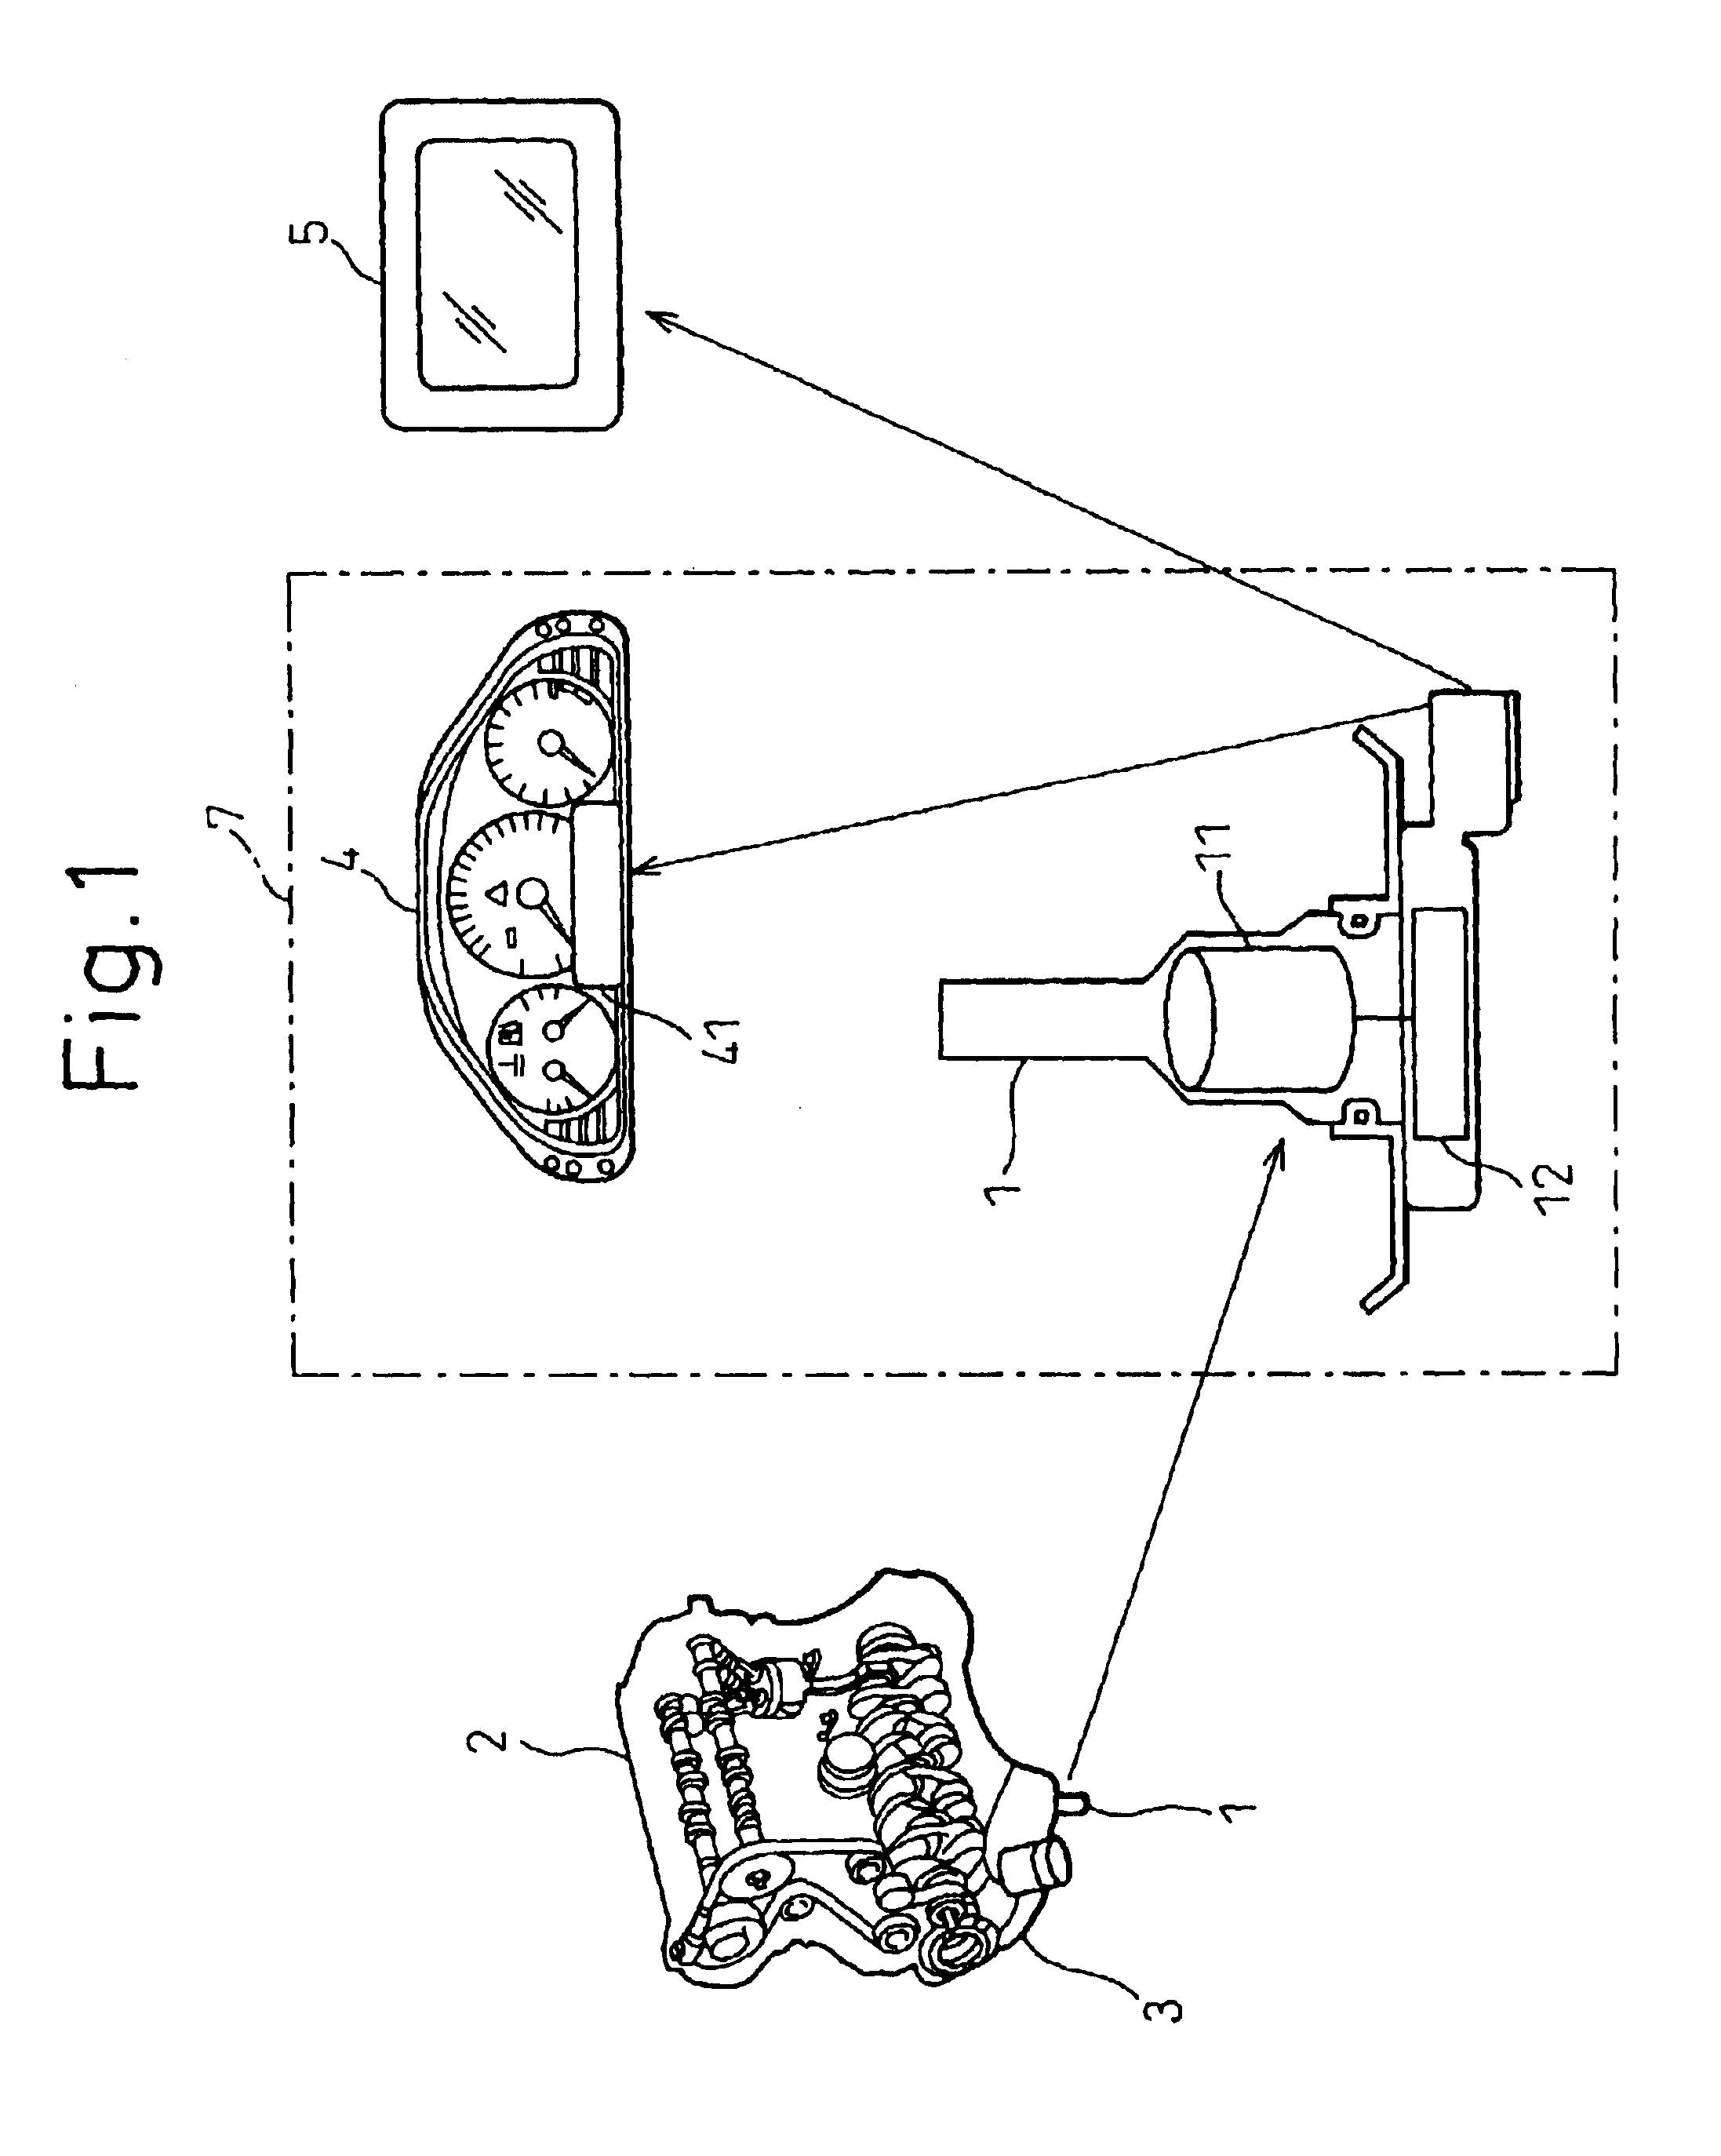 Device and method for detecting oil deterioration